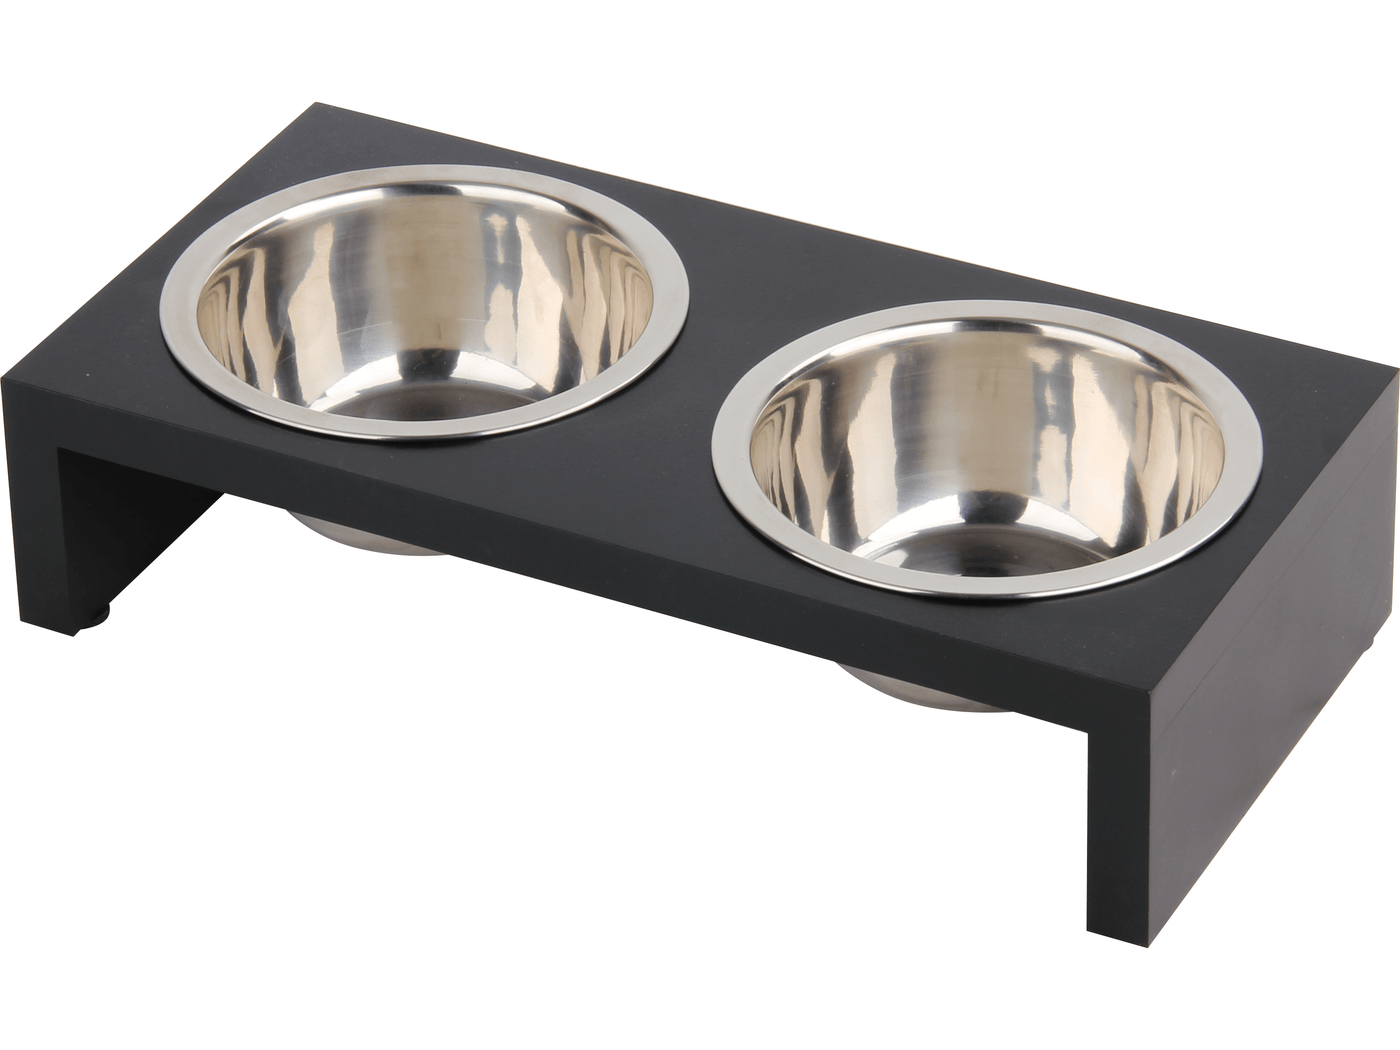 PAWISE Deluxe Pet DinnerX2